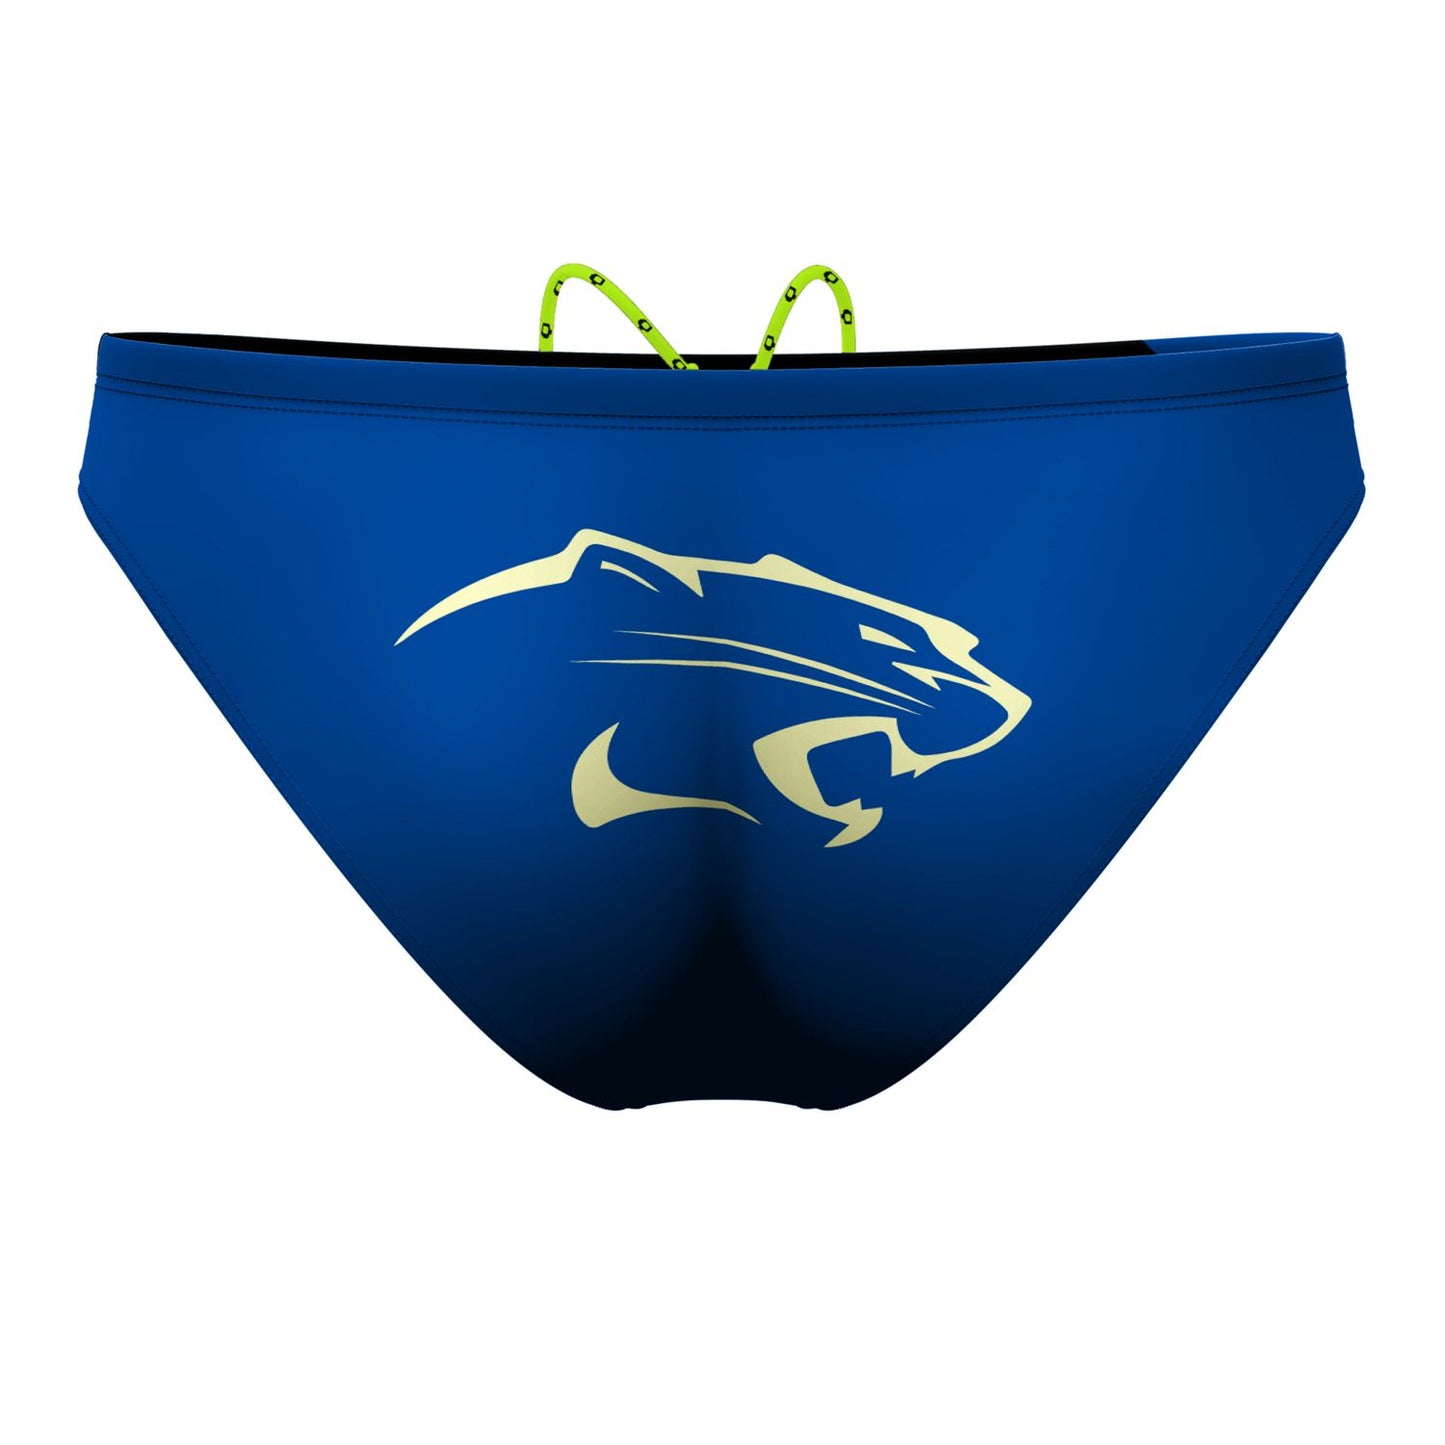 EDHS Waterpolo Brief